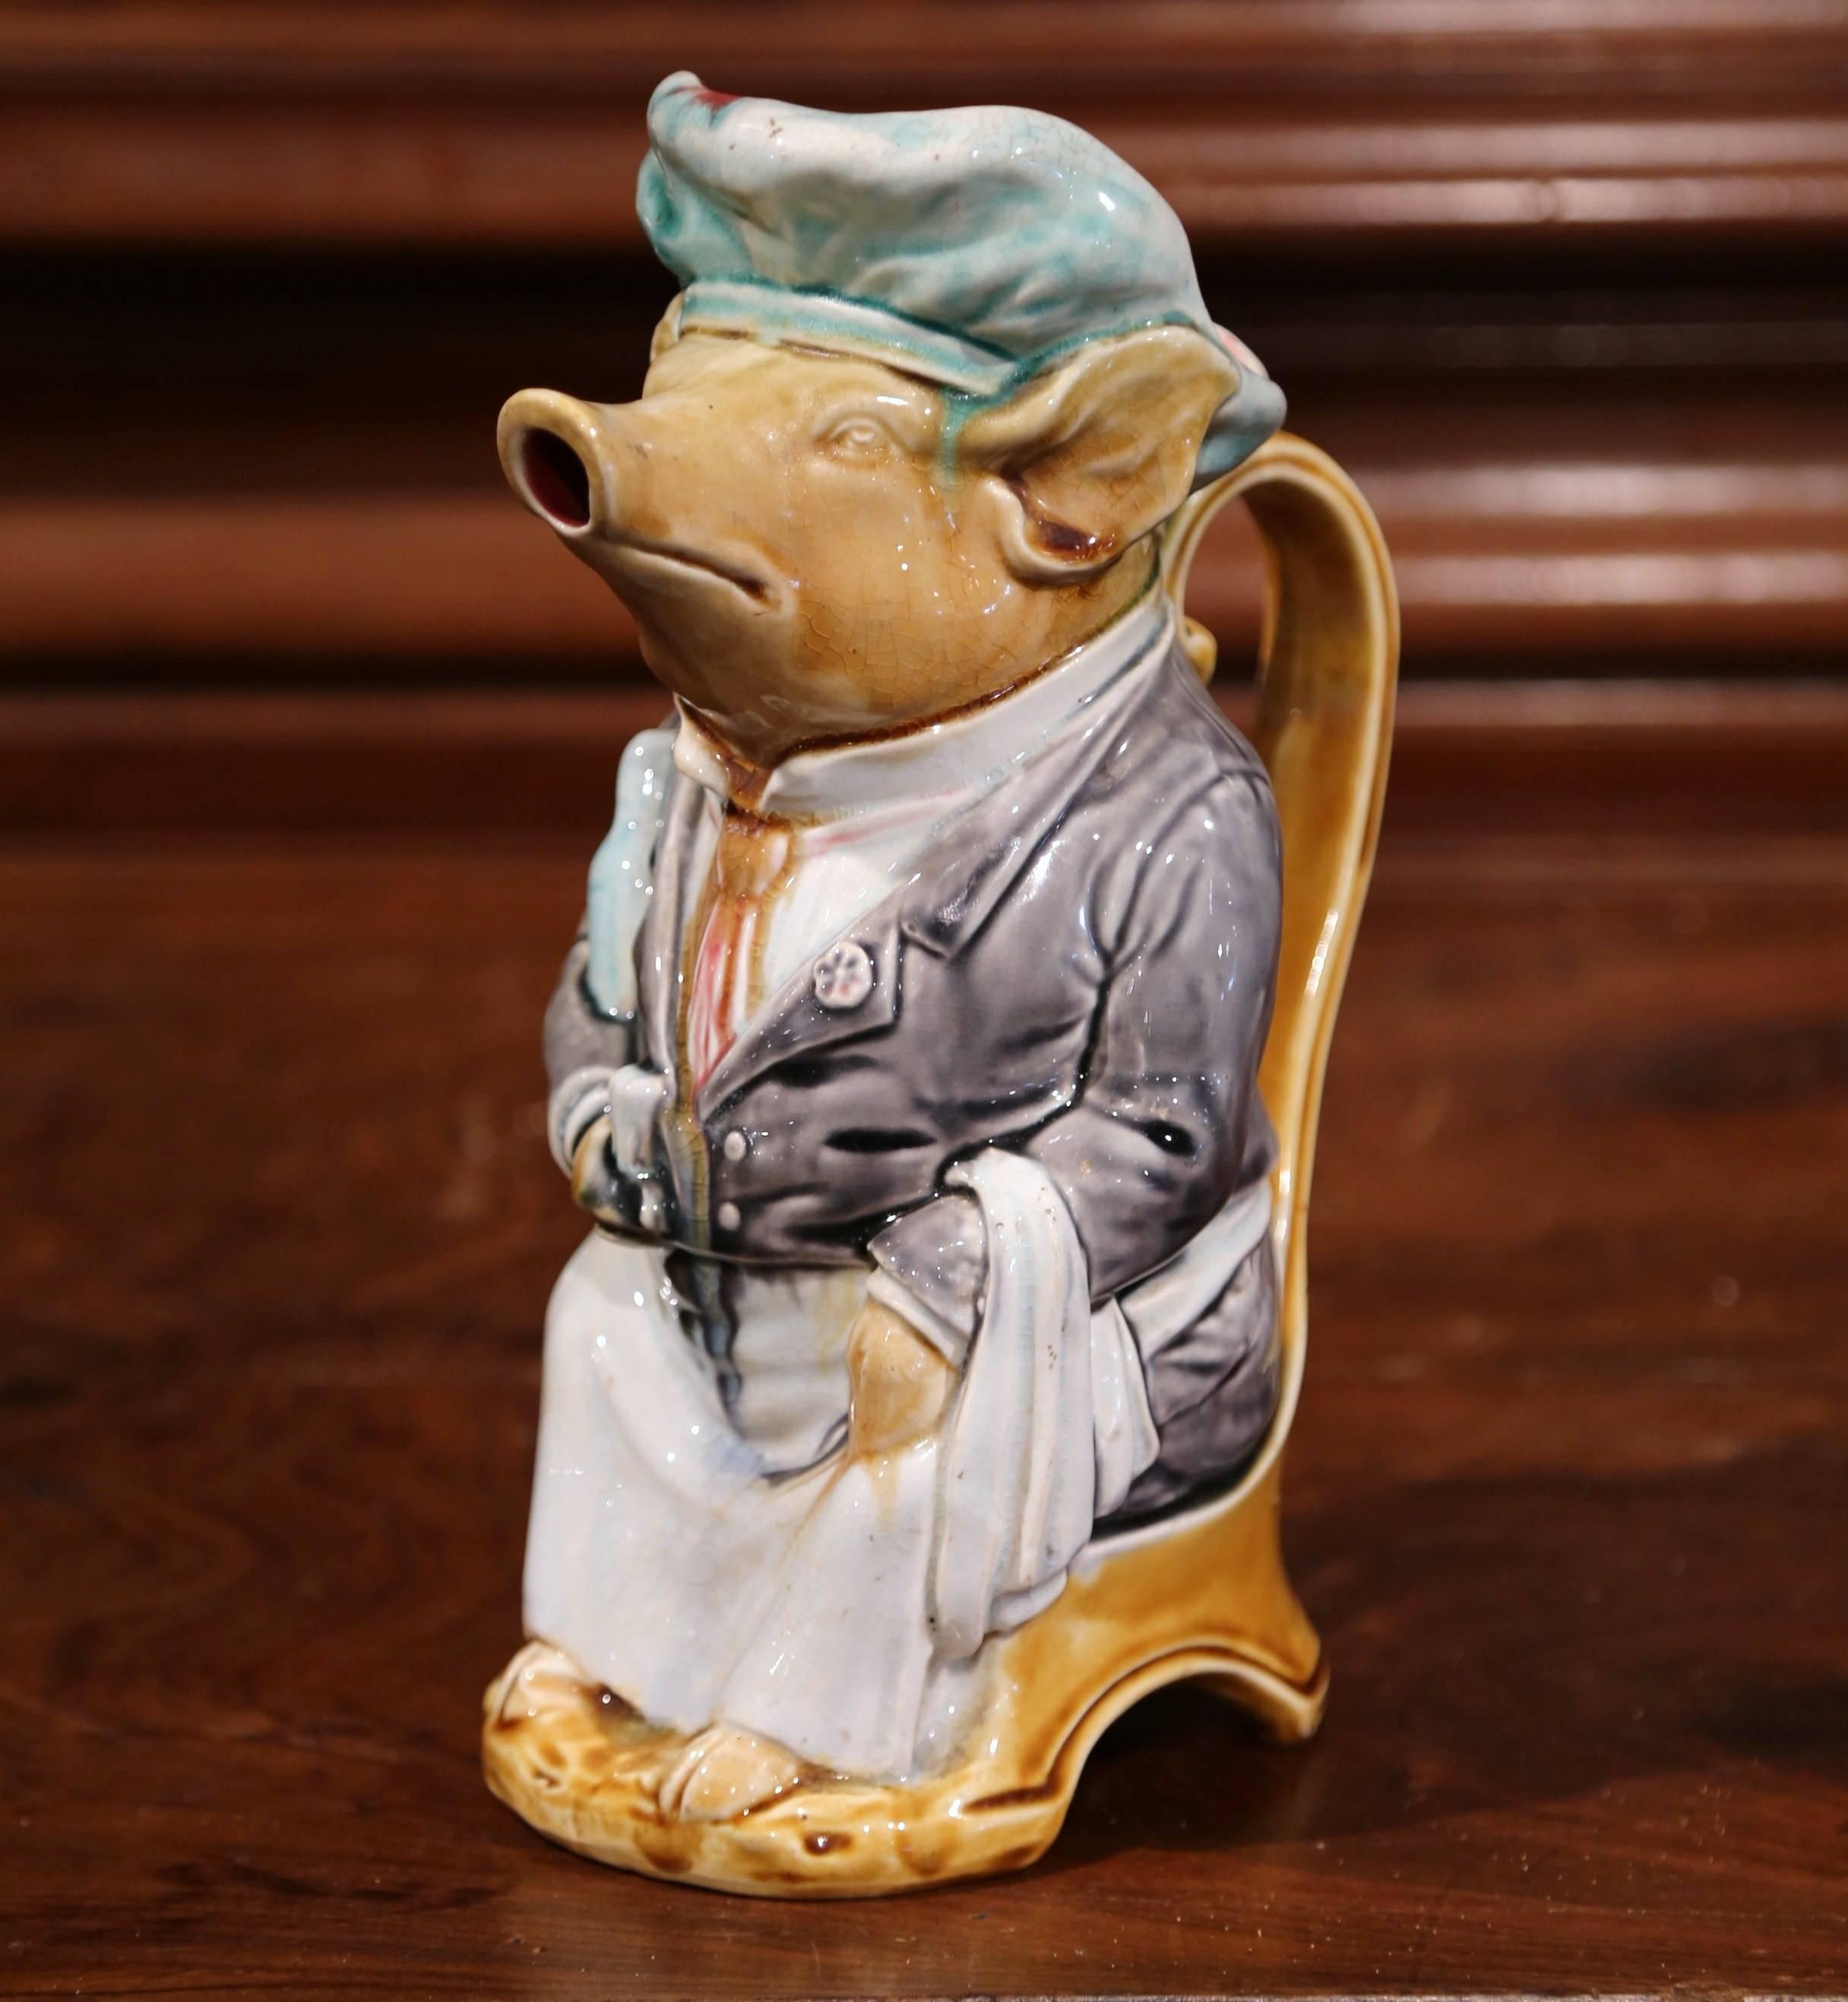 Hand-Crafted 19th Century French Hand Painted Ceramic Barbotine Pig Pitcher by Onnaing